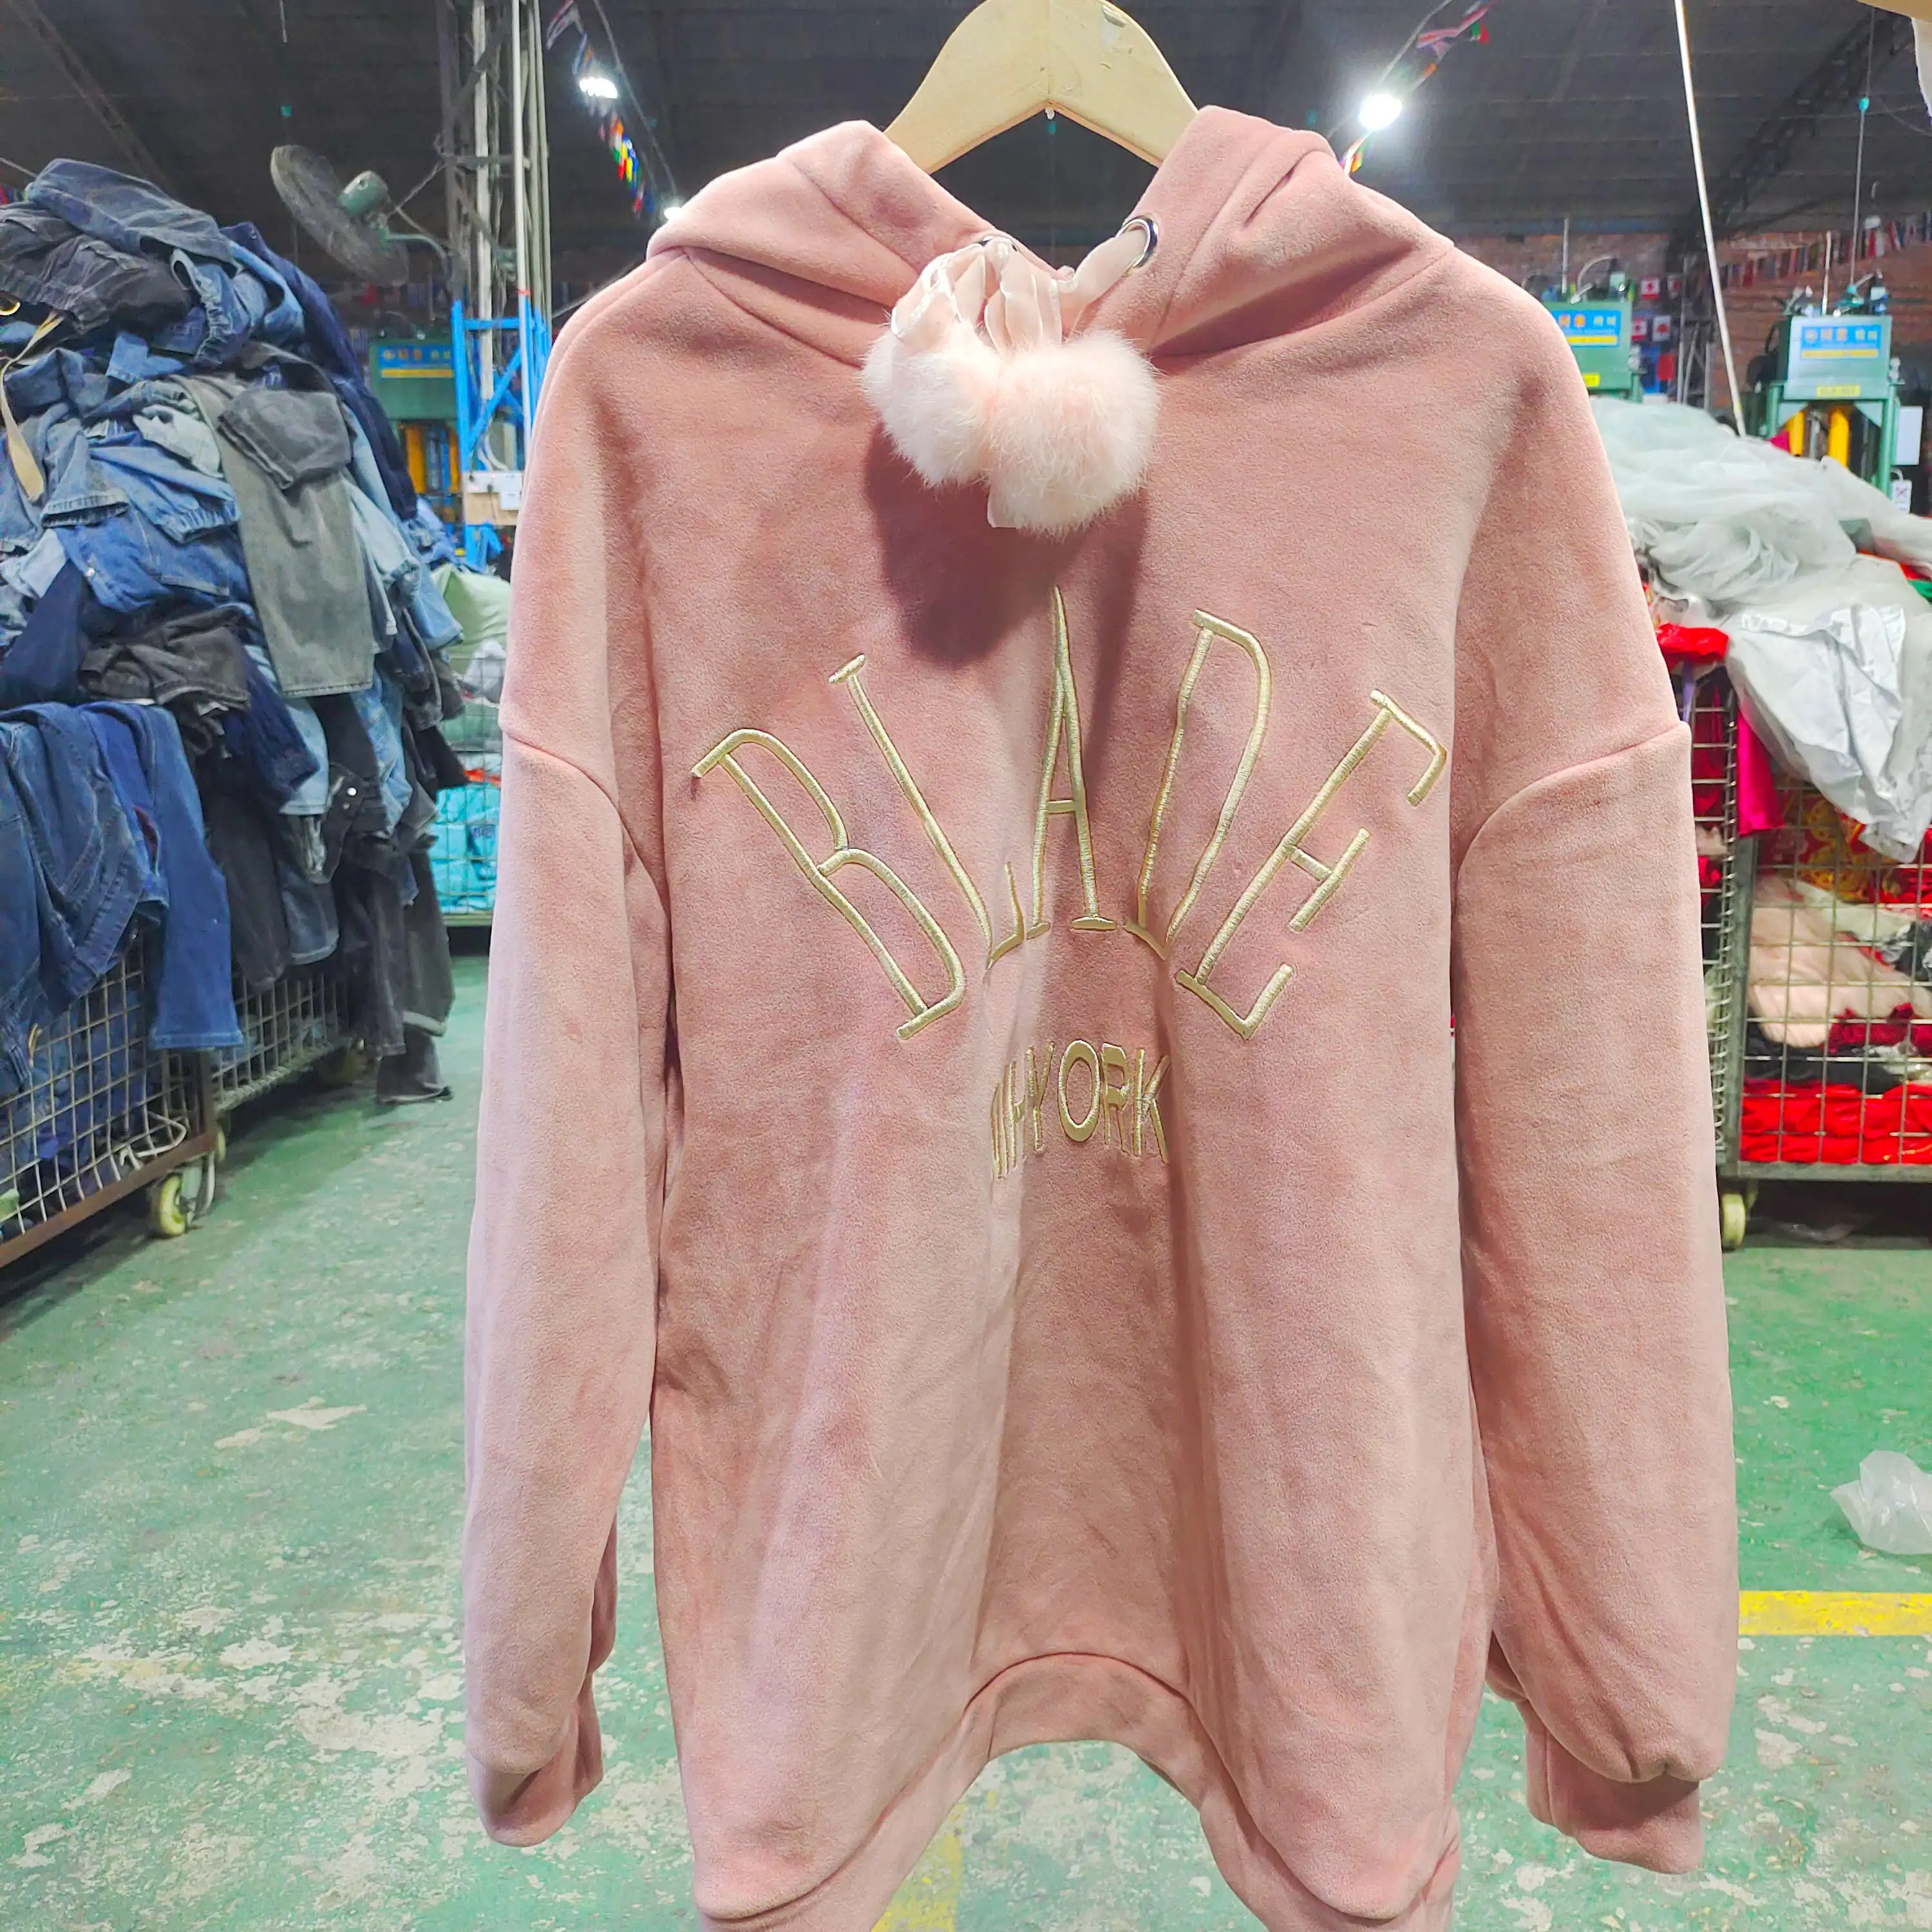 Alibaba-Online-Shopping-Website bales used wholesale used clothes used hoodies used hoodies bales